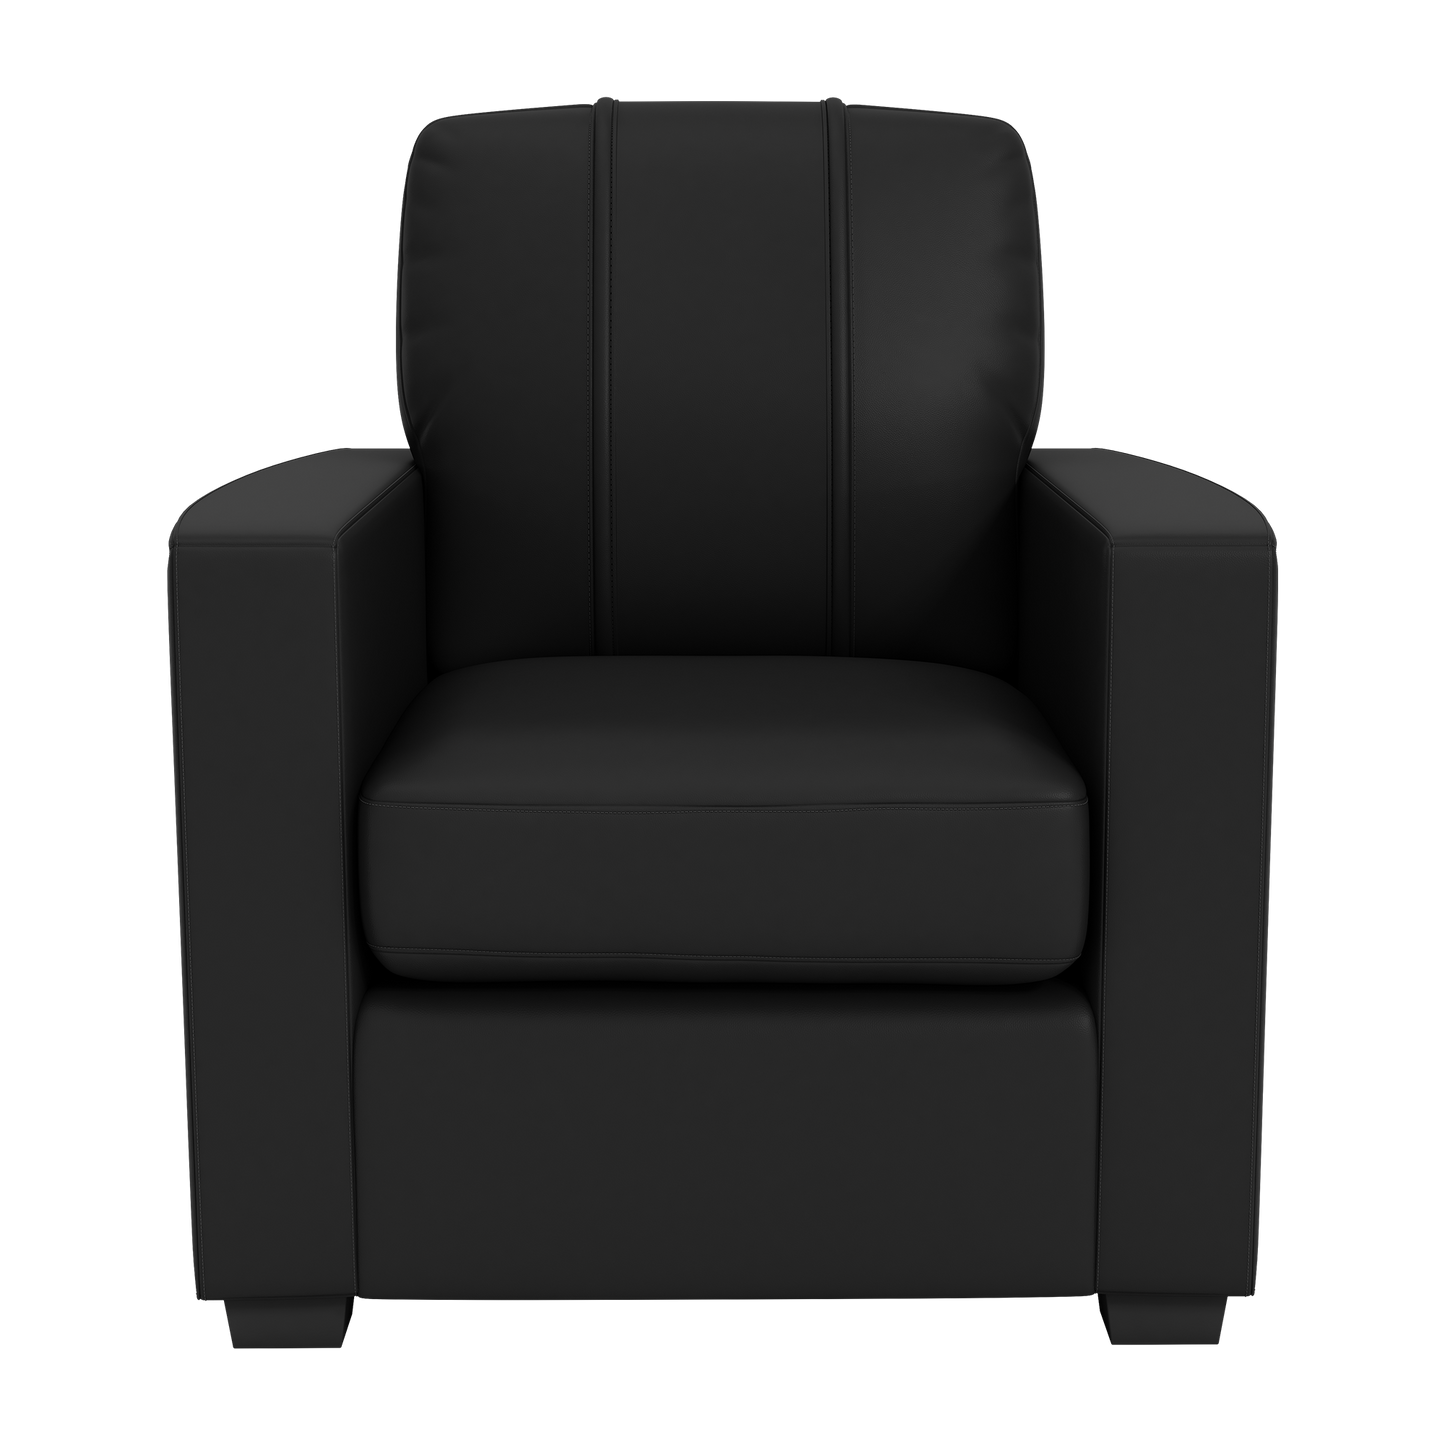 Silver Club Chair with Ohio State Primary Logo